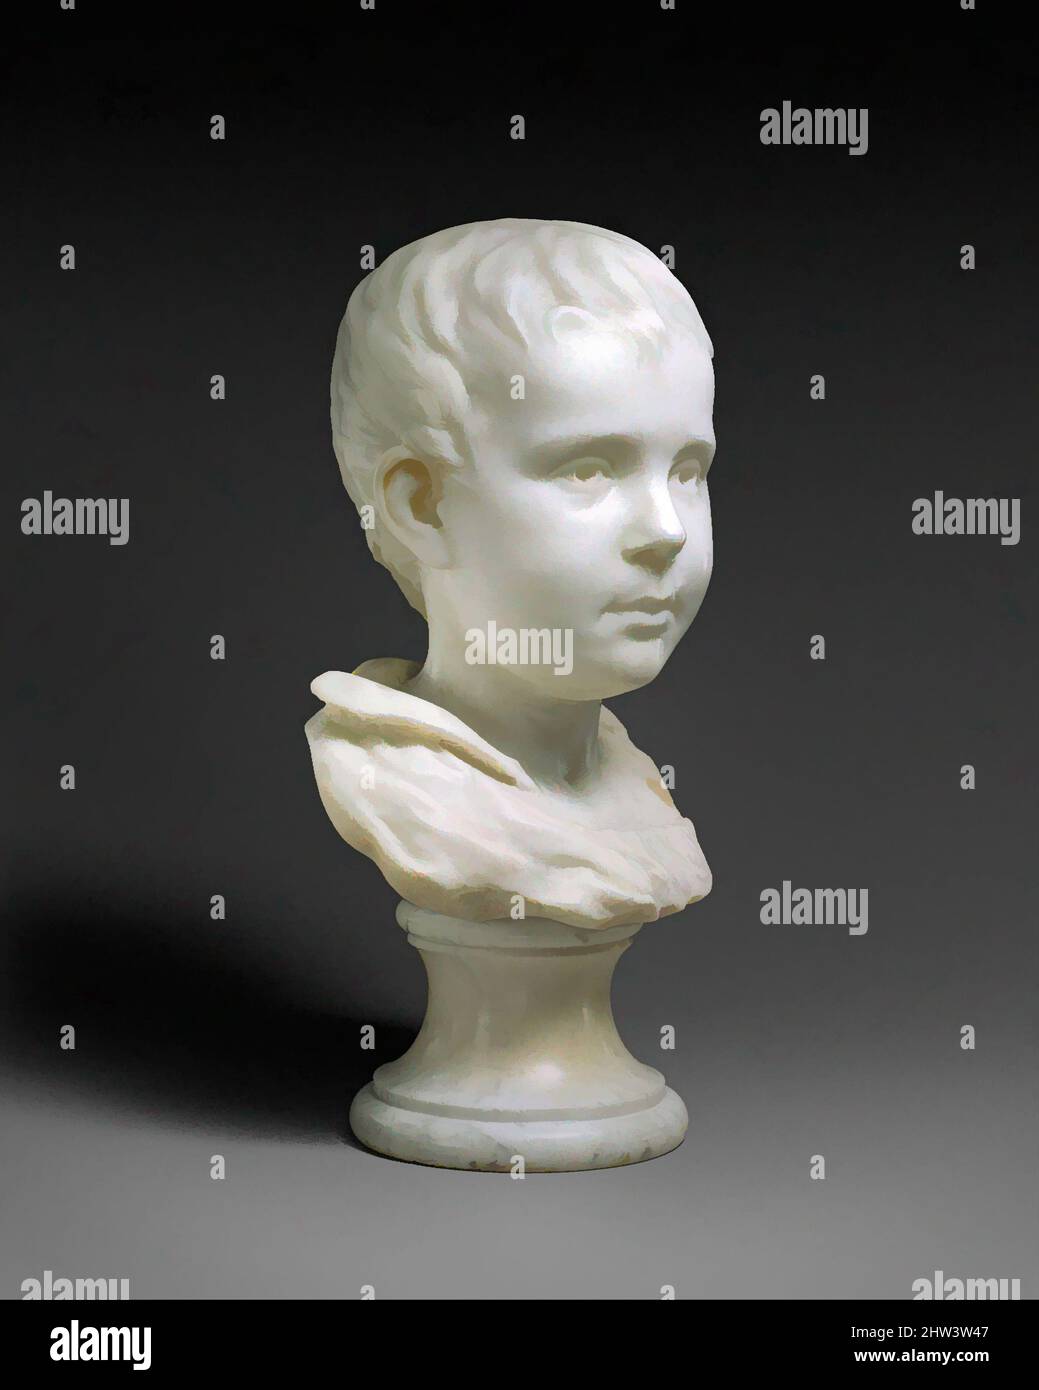 Art inspired by Emil Gauguin (1874–1955), the artist's son, ca. 1877–78, French, Marble, confirmed: 16 15/16 × 9 1/8 × 7 7/8 in. (43 × 23.2 × 20 cm), Sculpture, Paul Gauguin (French, Paris 1848–1903 Atuona, Hiva Oa, Marquesas Islands), In 1877, while still a stockbroker, Paul Gauguin, Classic works modernized by Artotop with a splash of modernity. Shapes, color and value, eye-catching visual impact on art. Emotions through freedom of artworks in a contemporary way. A timeless message pursuing a wildly creative new direction. Artists turning to the digital medium and creating the Artotop NFT Stock Photo